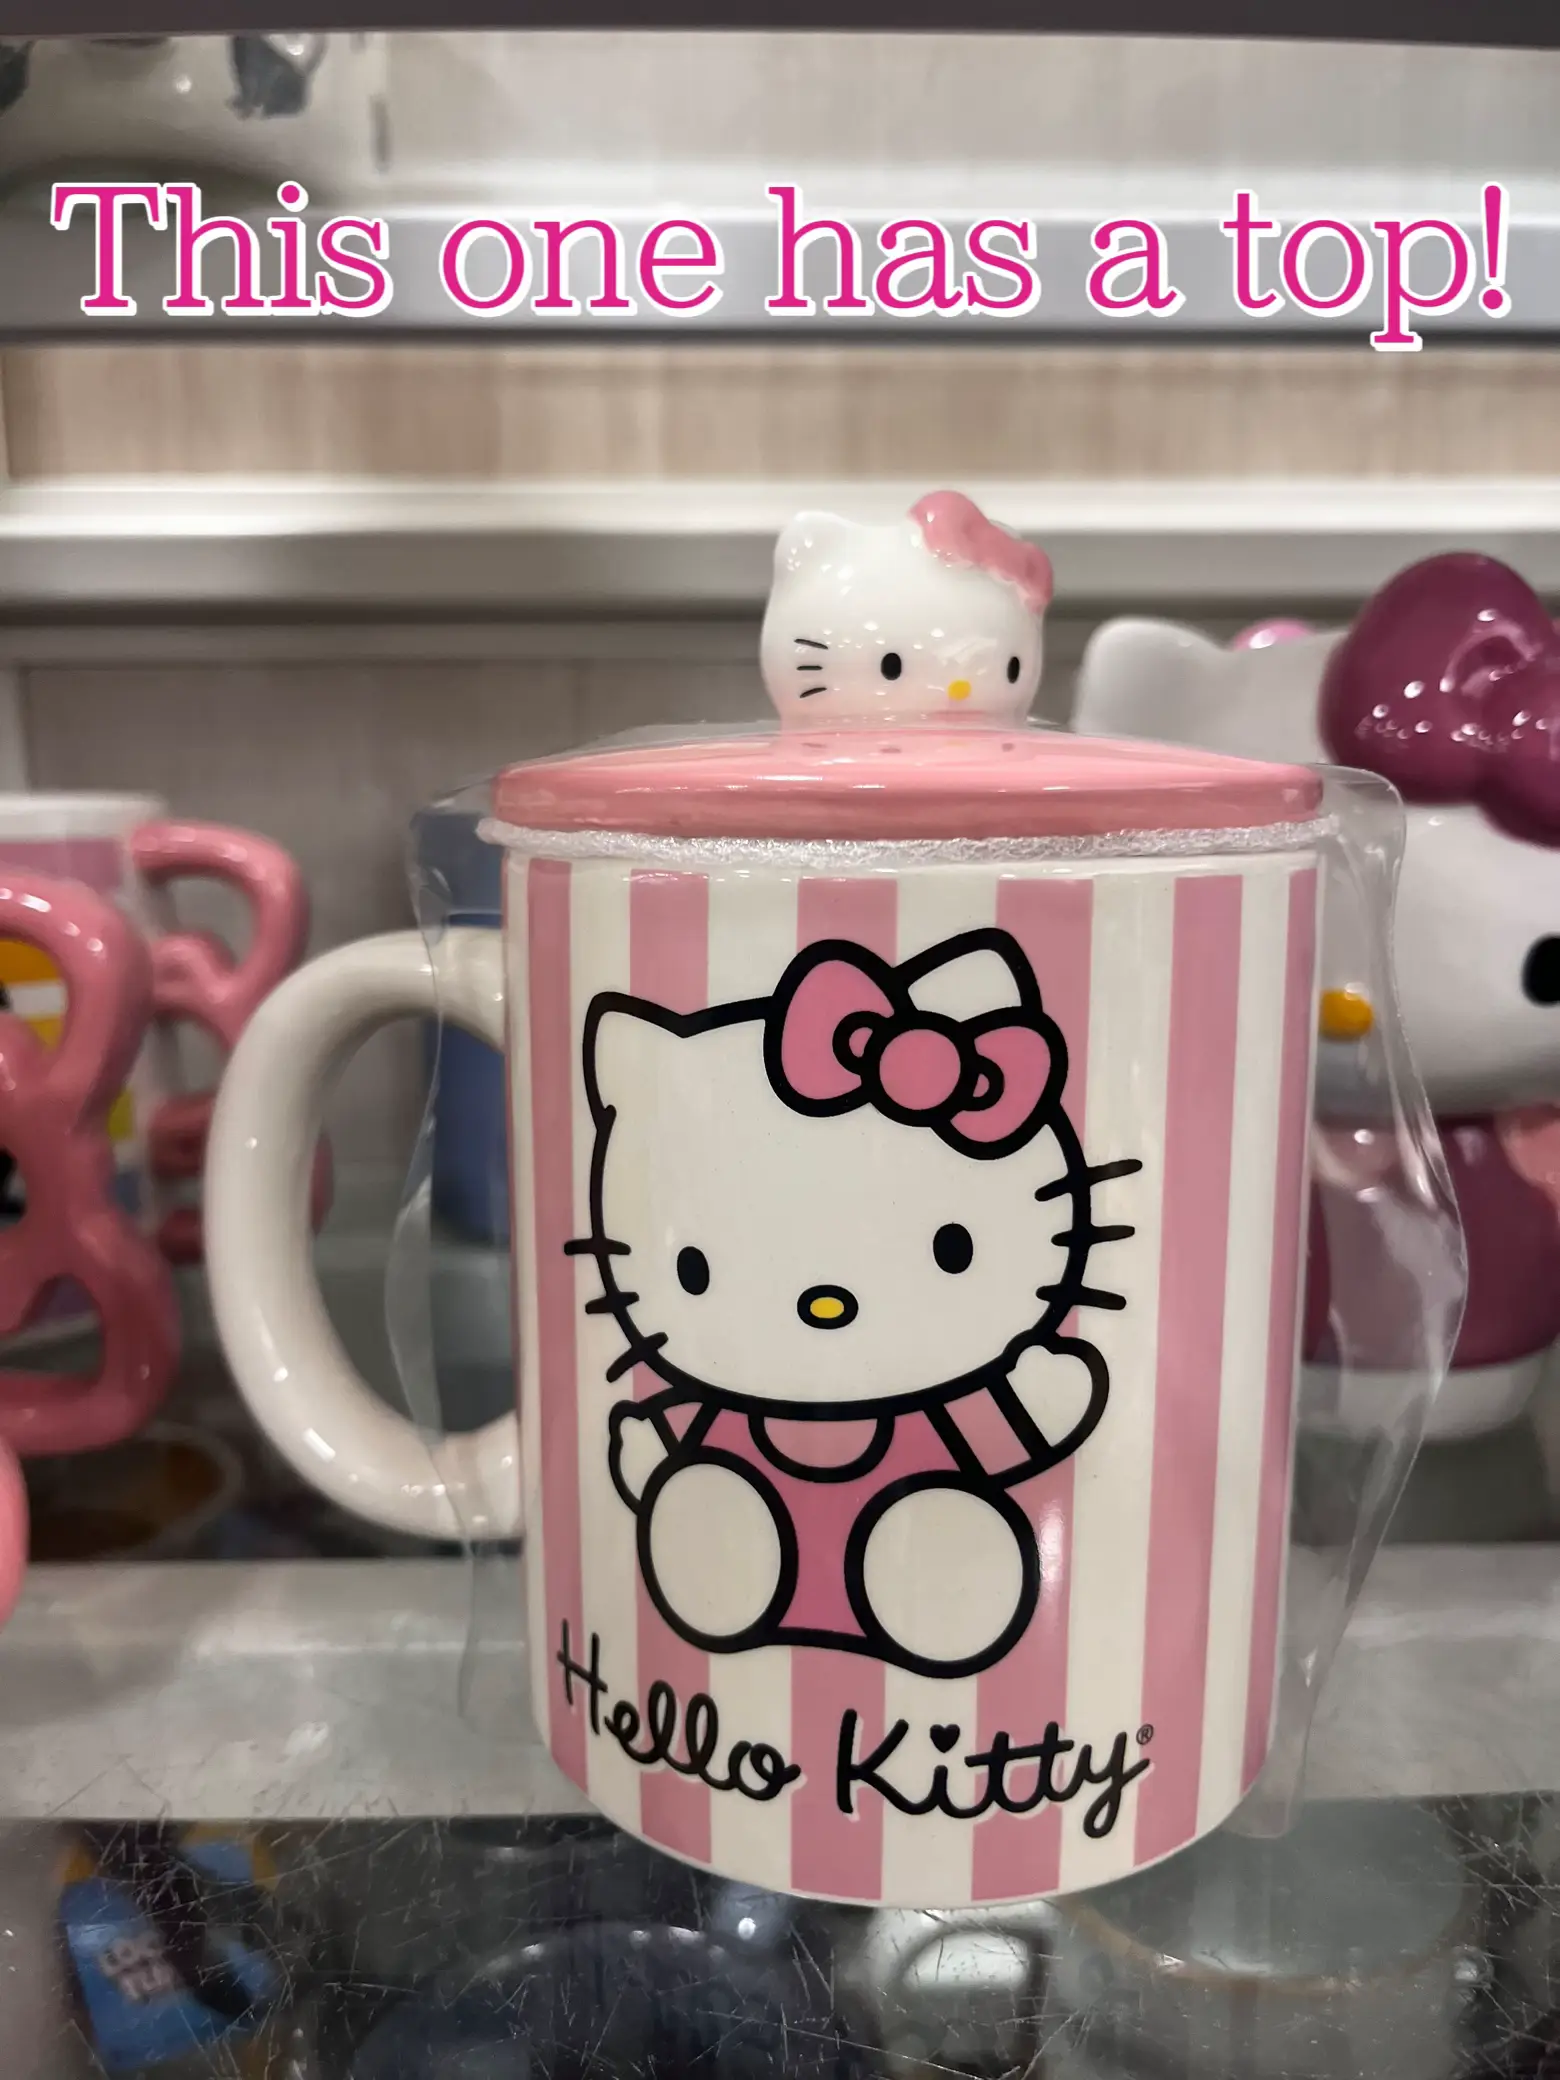 The only Hello Kitty in the store is this mug (which I already have!) 😅  Their price is lower though. Saw some other non HK cute stuff too 😍